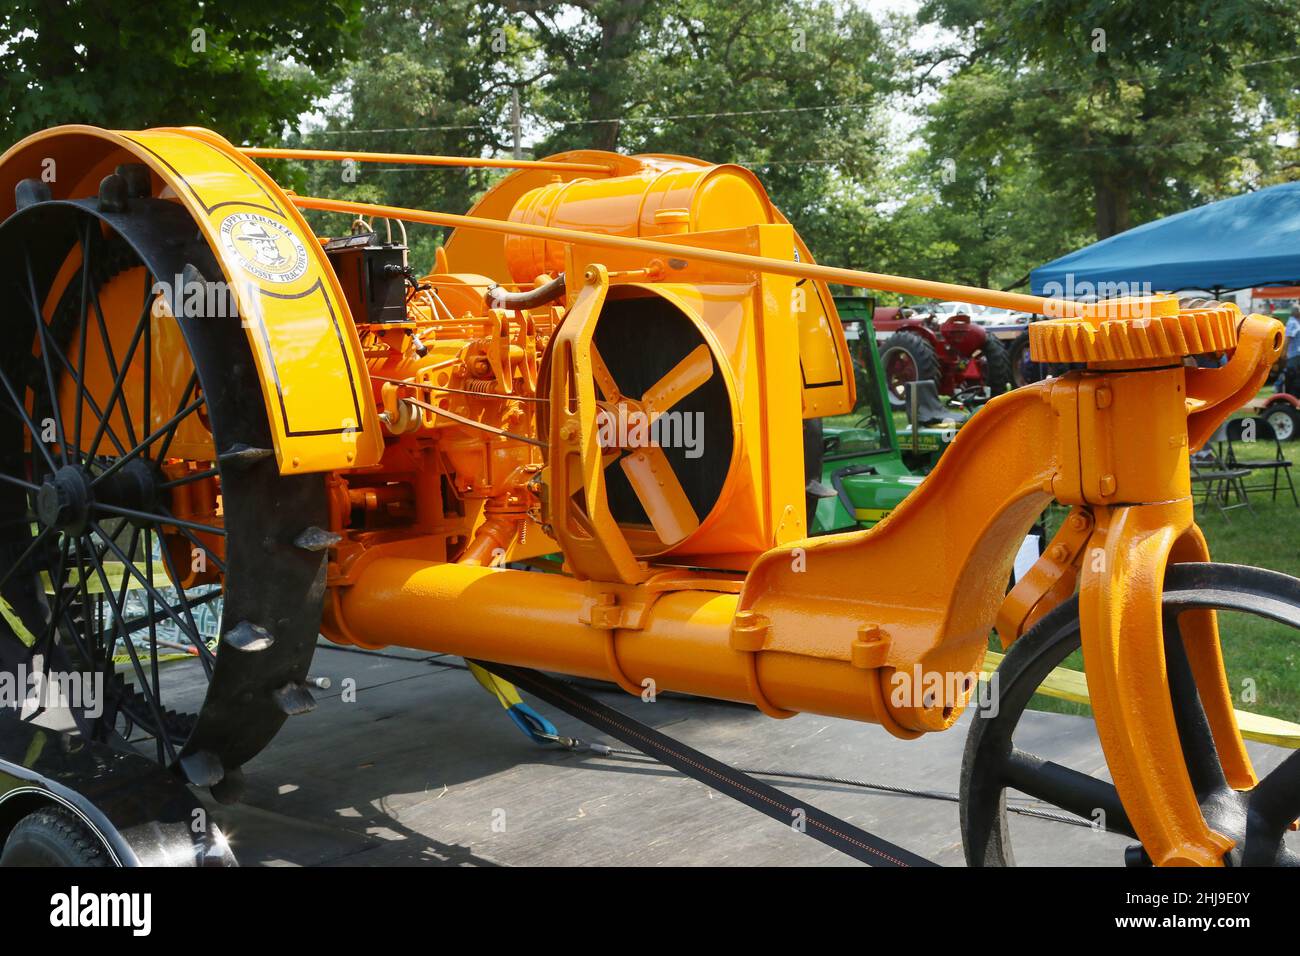 LaCrosse Happy Farmer Tractor. LaCrosse Tractor Company. Viewed at 72th Annual Reunion. July 15, 16, 17, 18, 2021. Miami Valley Steam Threshers Associ Stock Photo